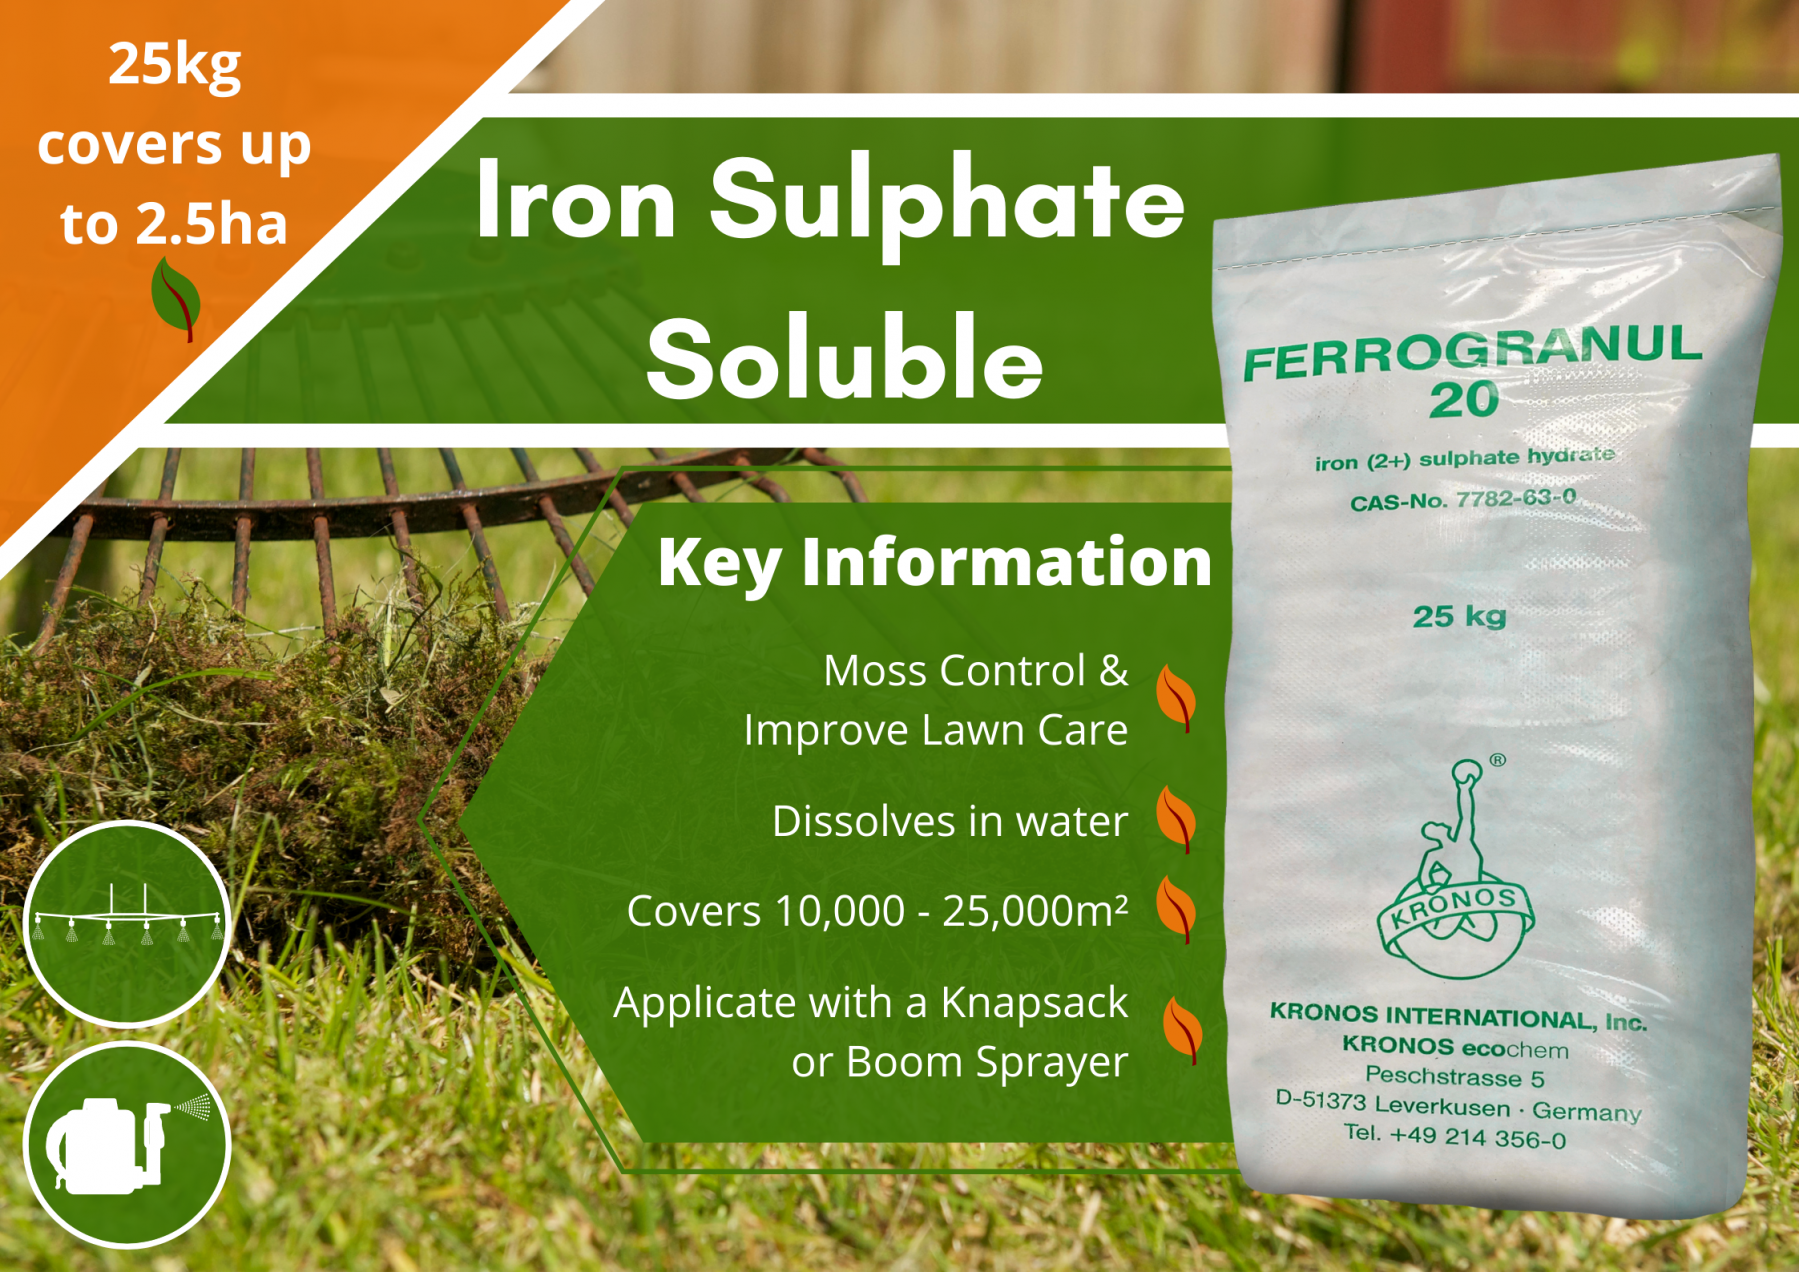 https://www.agrigem.co.uk/media/catalog/product/cache/1/image/1800x/040ec09b1e35df139433887a97daa66f/i/r/iron_sulphate_2.png